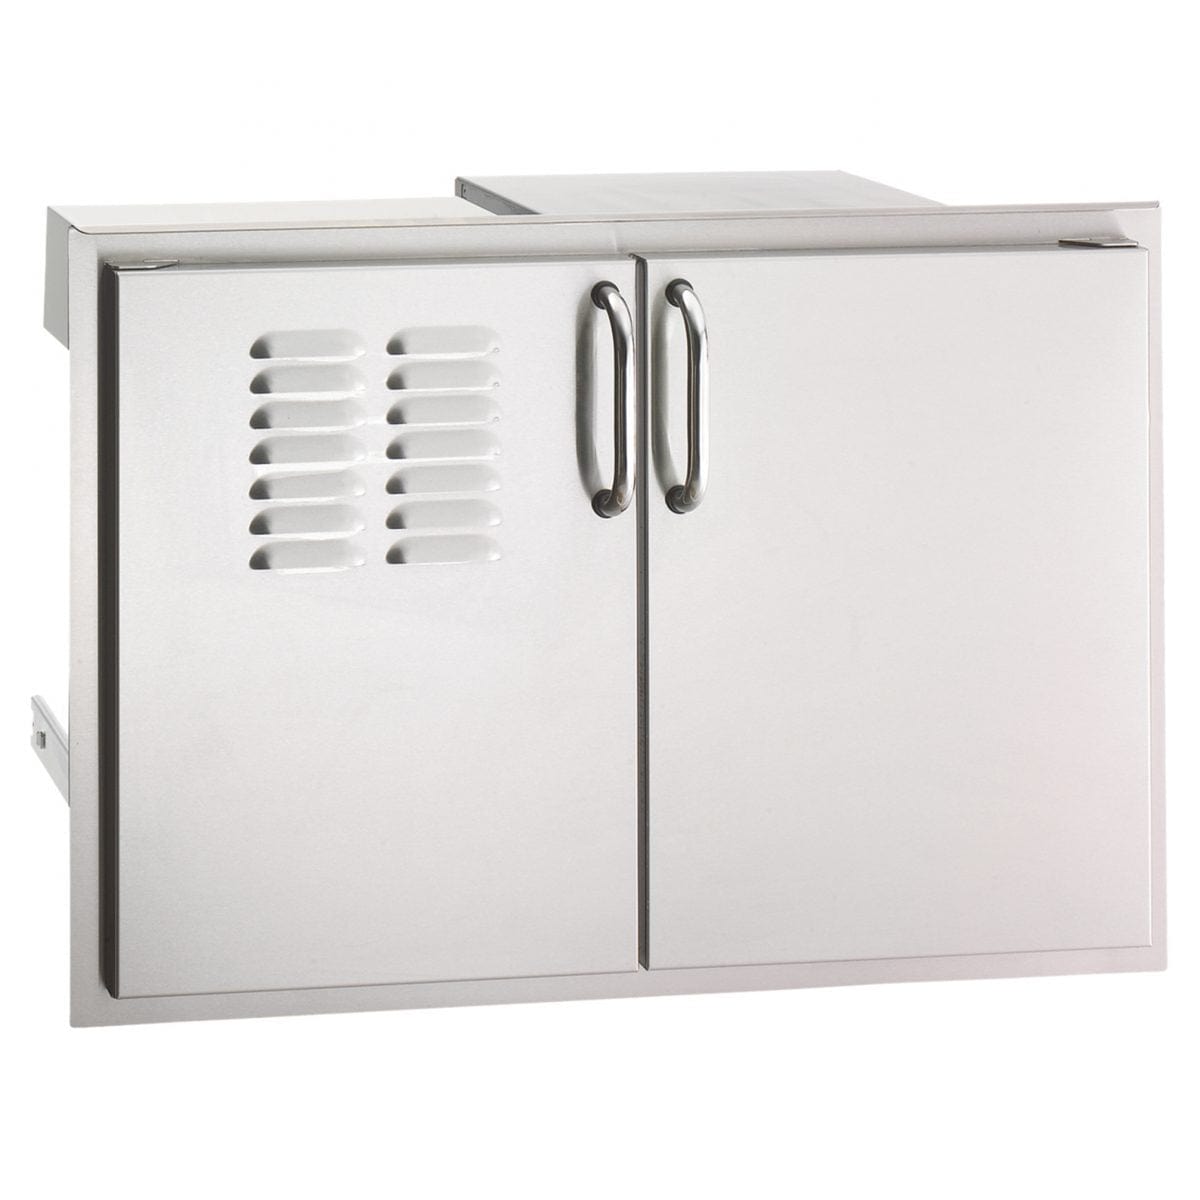 Fire Magic Select Double Doors with Tank Tray & Dual Drawers - Kitchen King Direct